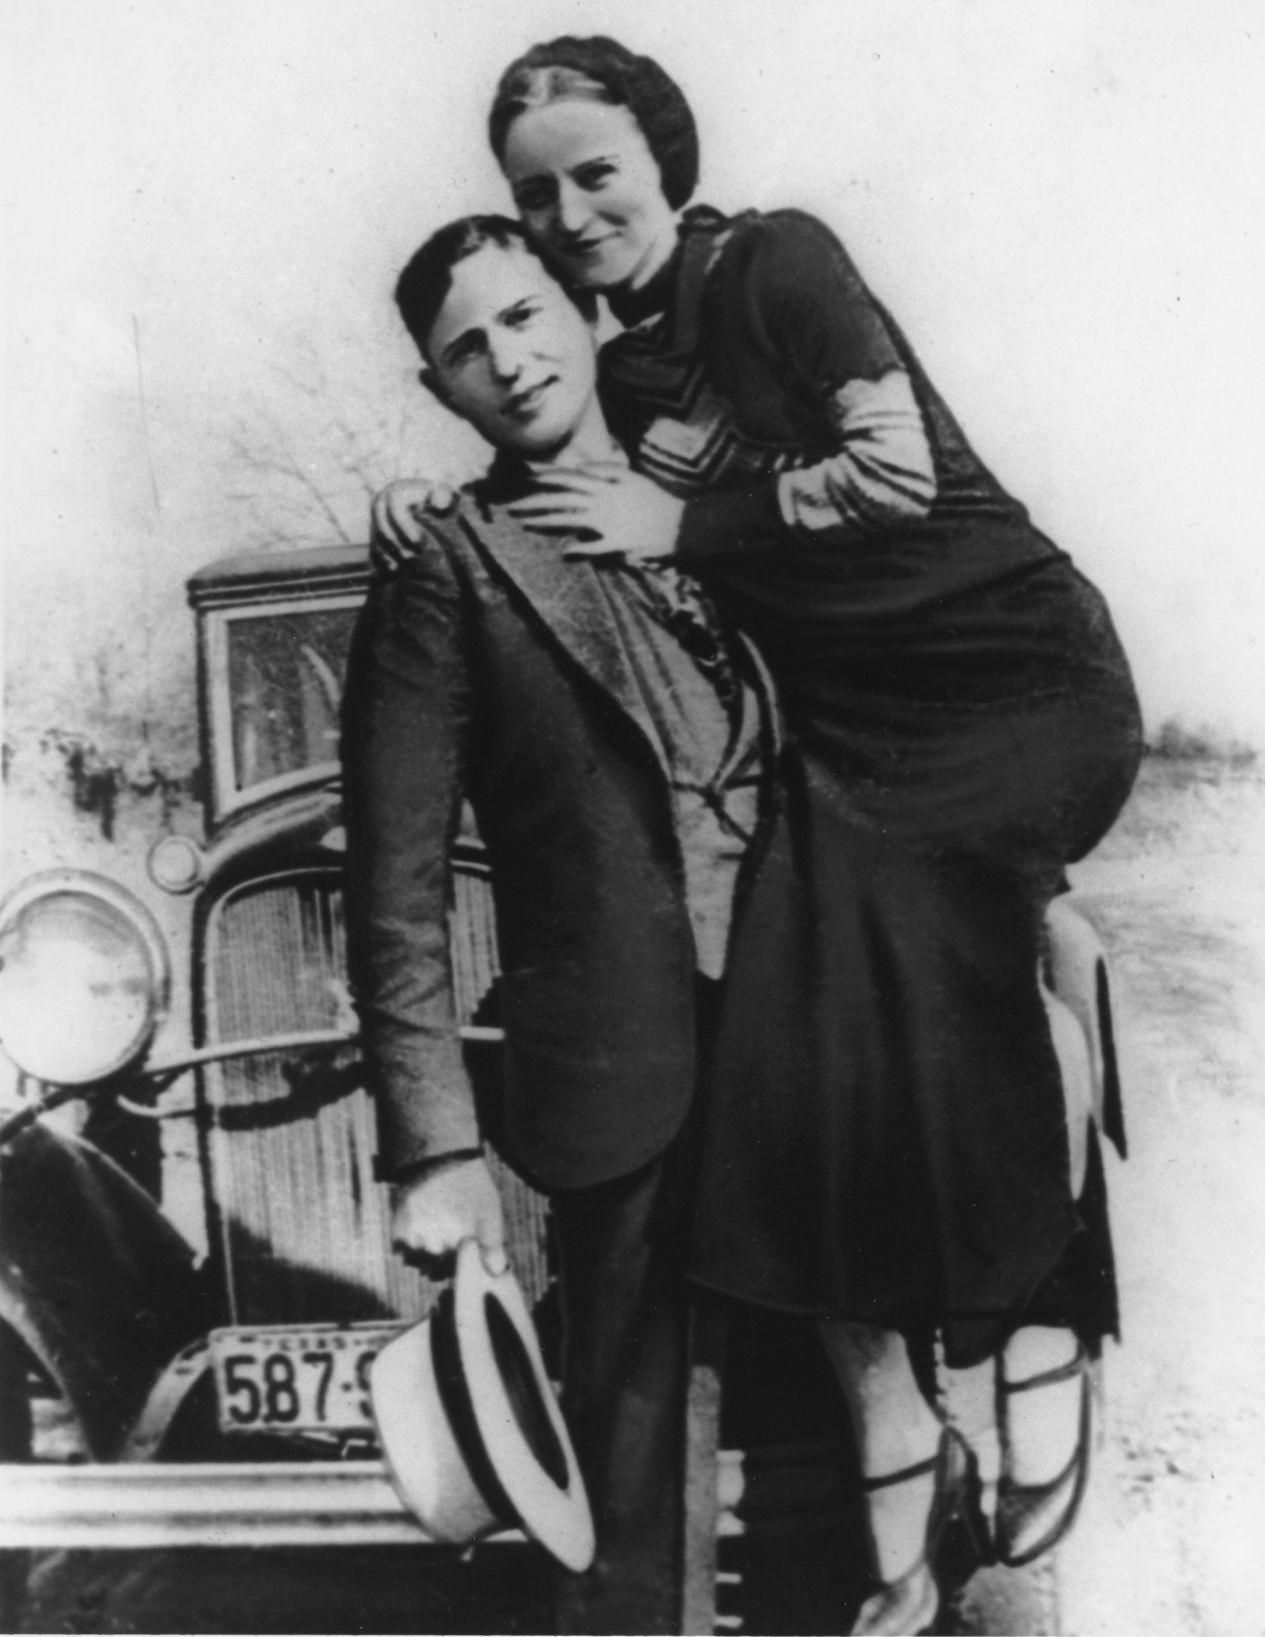 where was bonnie and clyde ambushed and killed